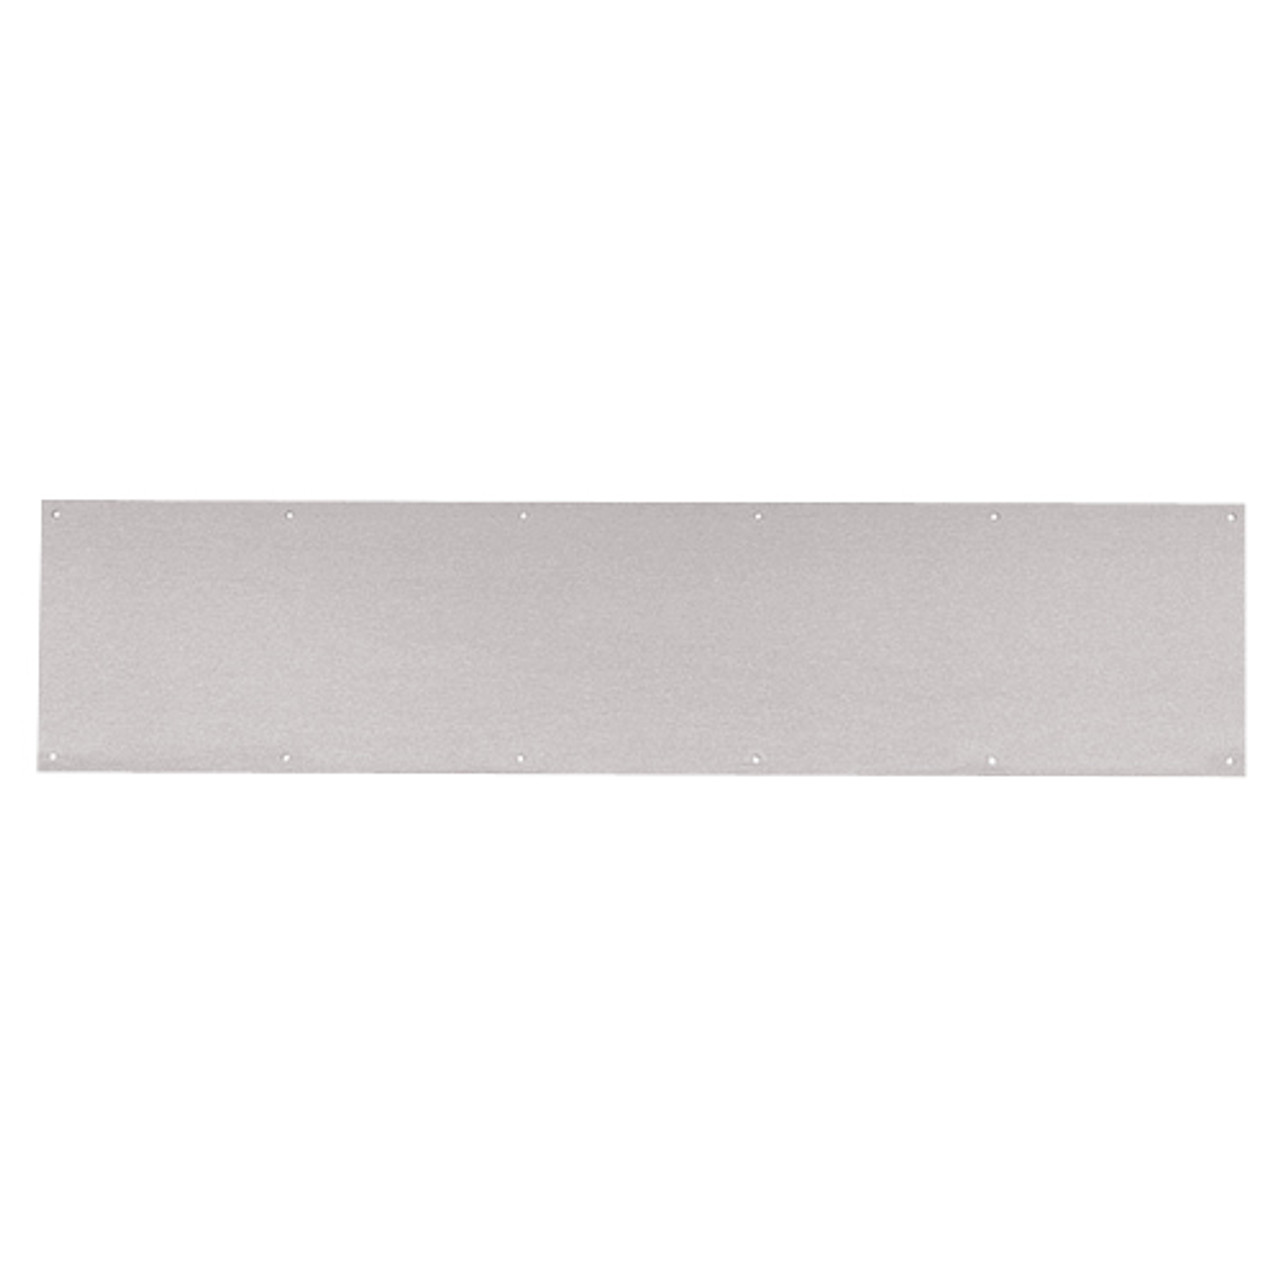 8400-US32D-42x35-B-CS Ives 8400 Series Protection Plate in Satin Stainless Steel